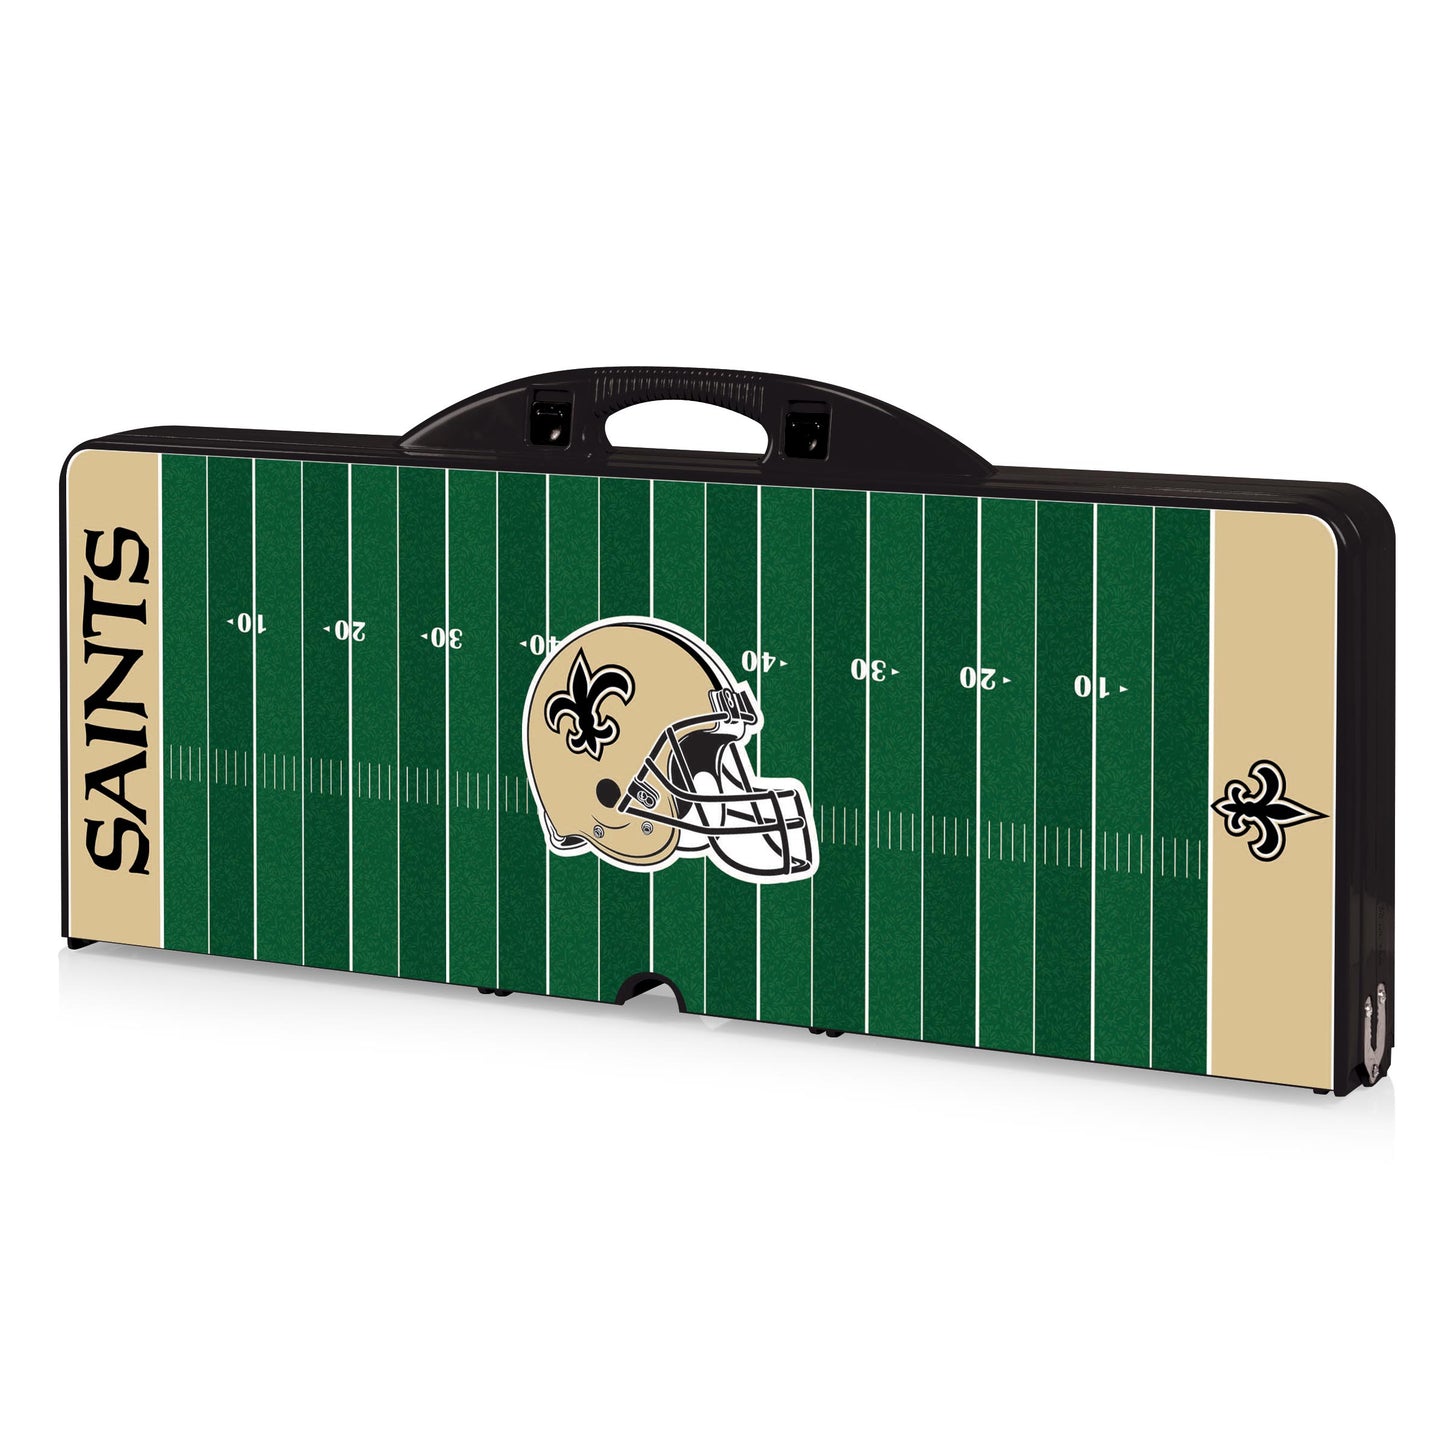 New Orleans Saints - Picnic Table Portable Folding Table with Seats and Umbrella